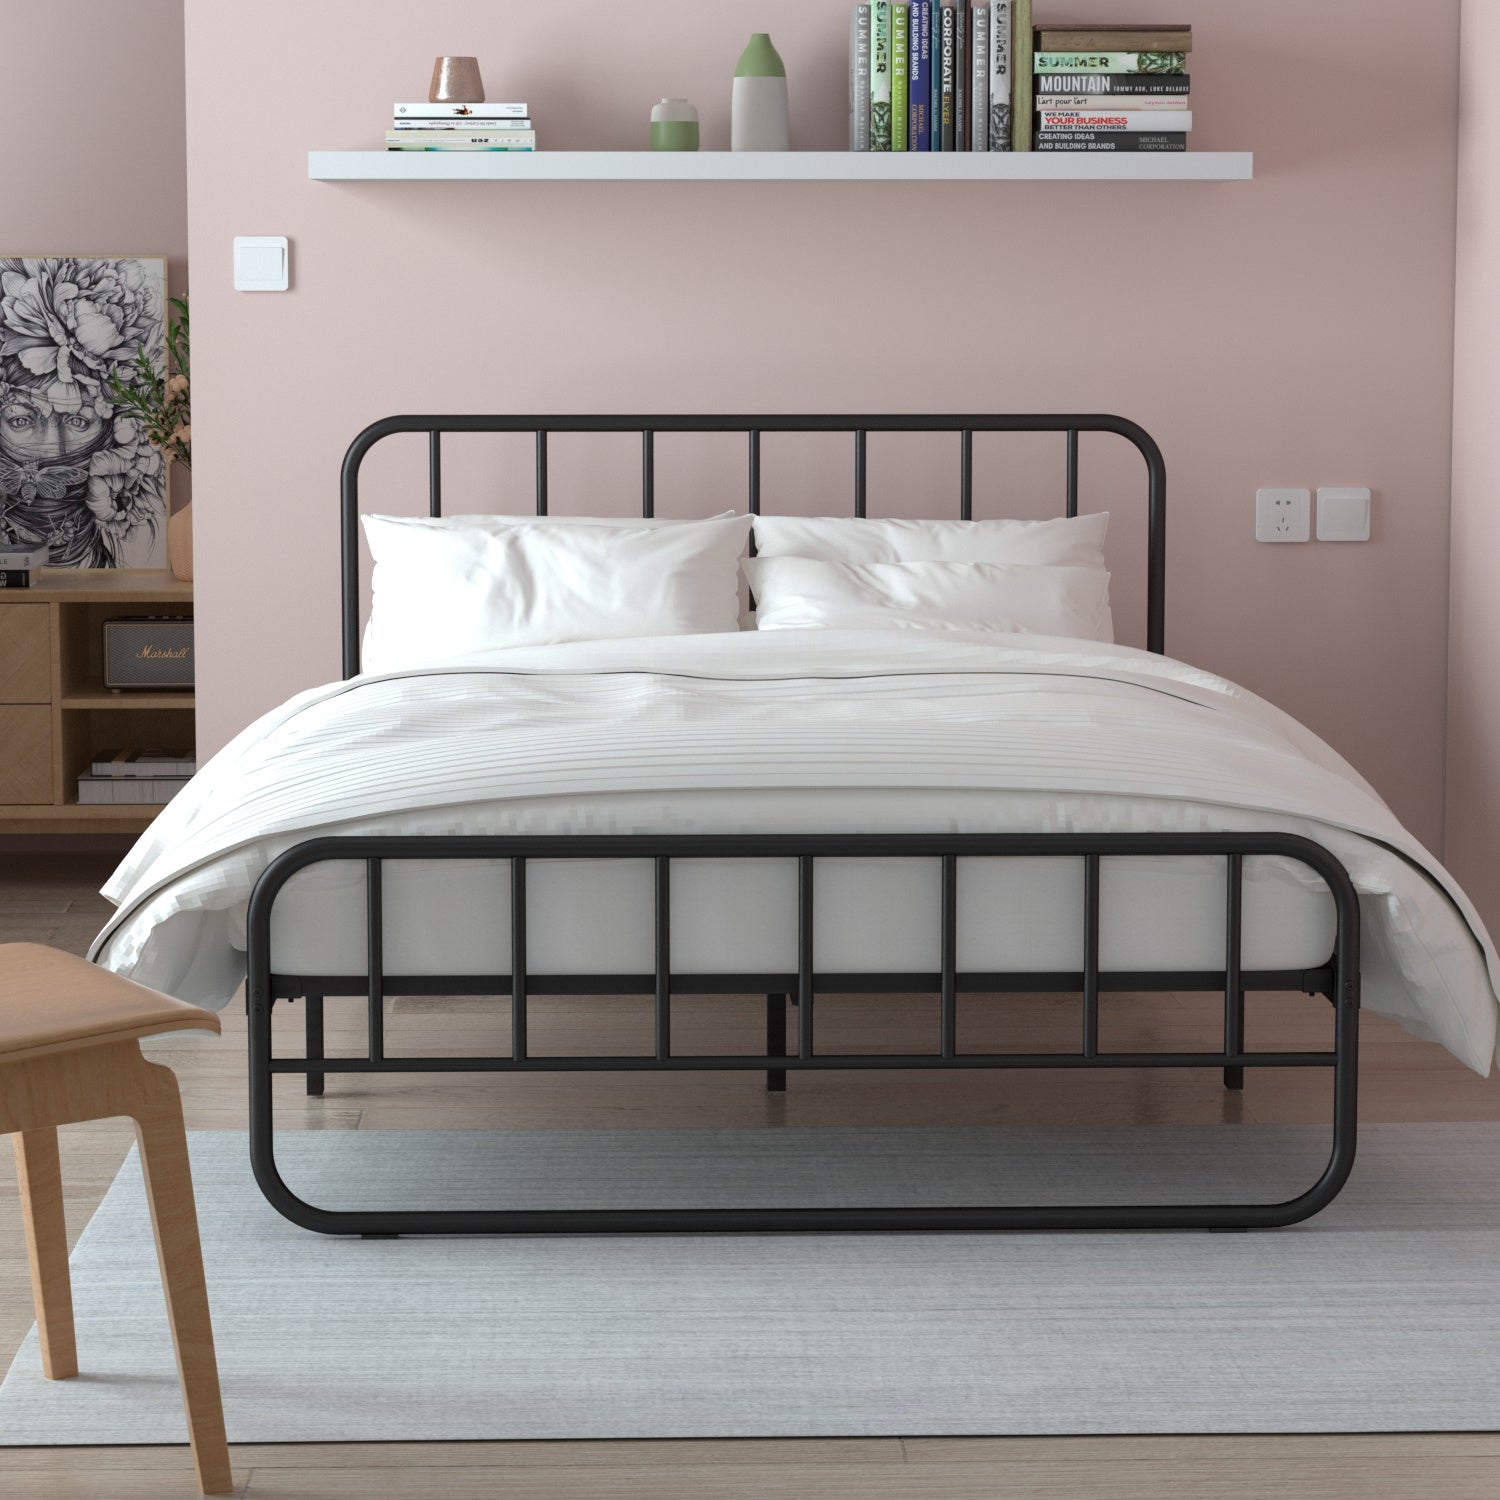 VENI Metal Bed Frame with Headboard Easy to Assemble